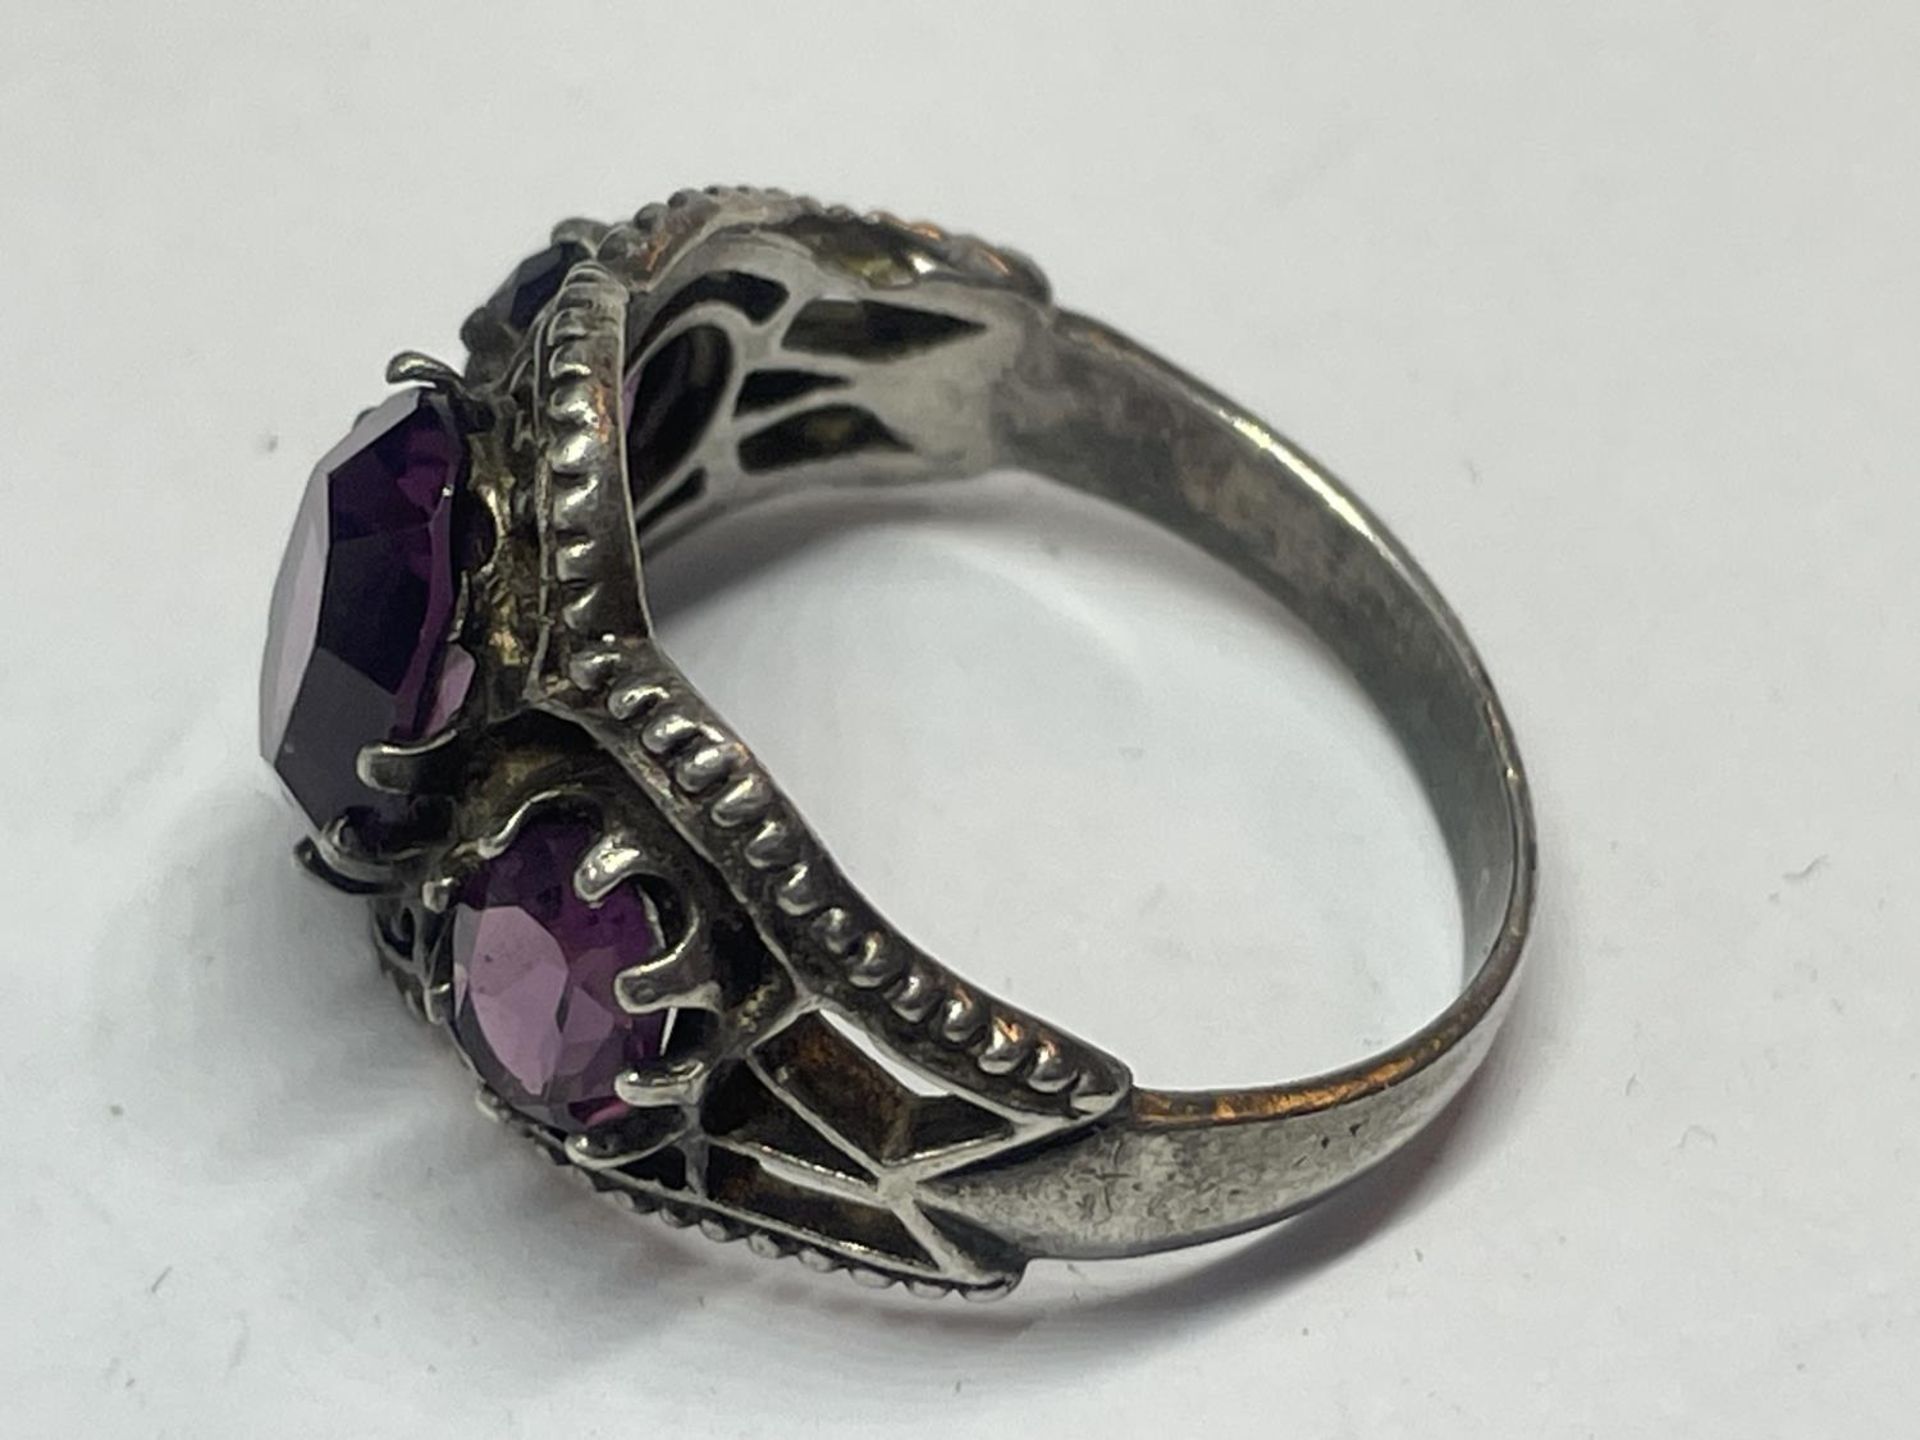 A SILVER RING WITH AMETHYST COLOURED STONES - Image 2 of 3